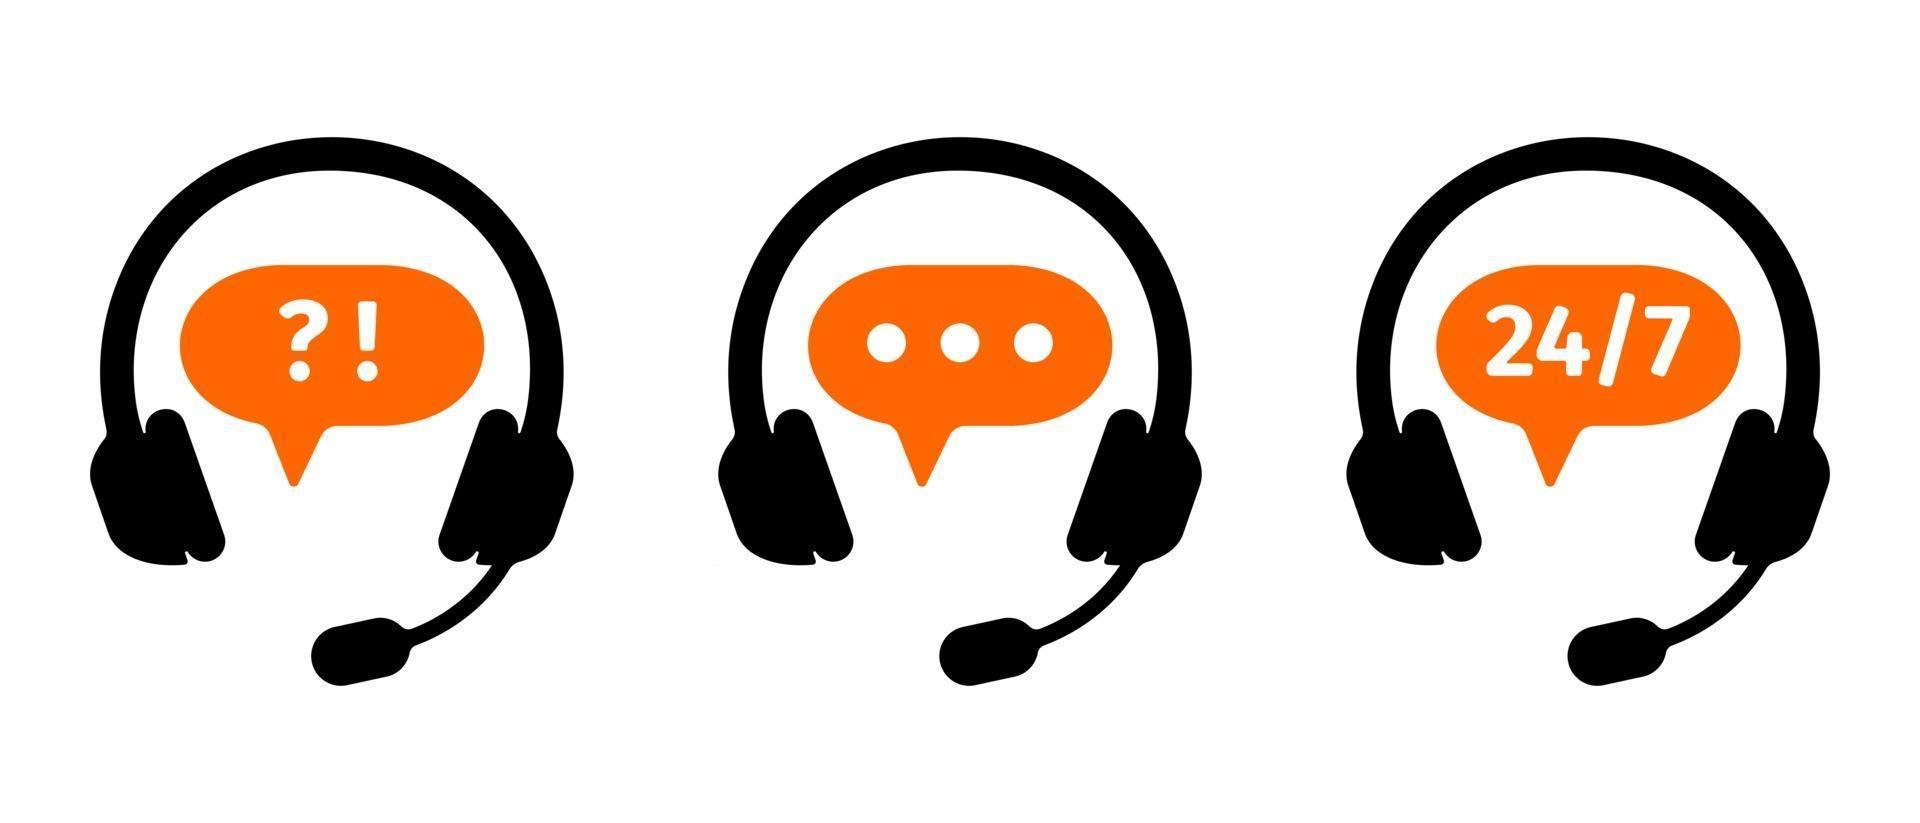 Hotline call center icons. Customers support online service symbols vector